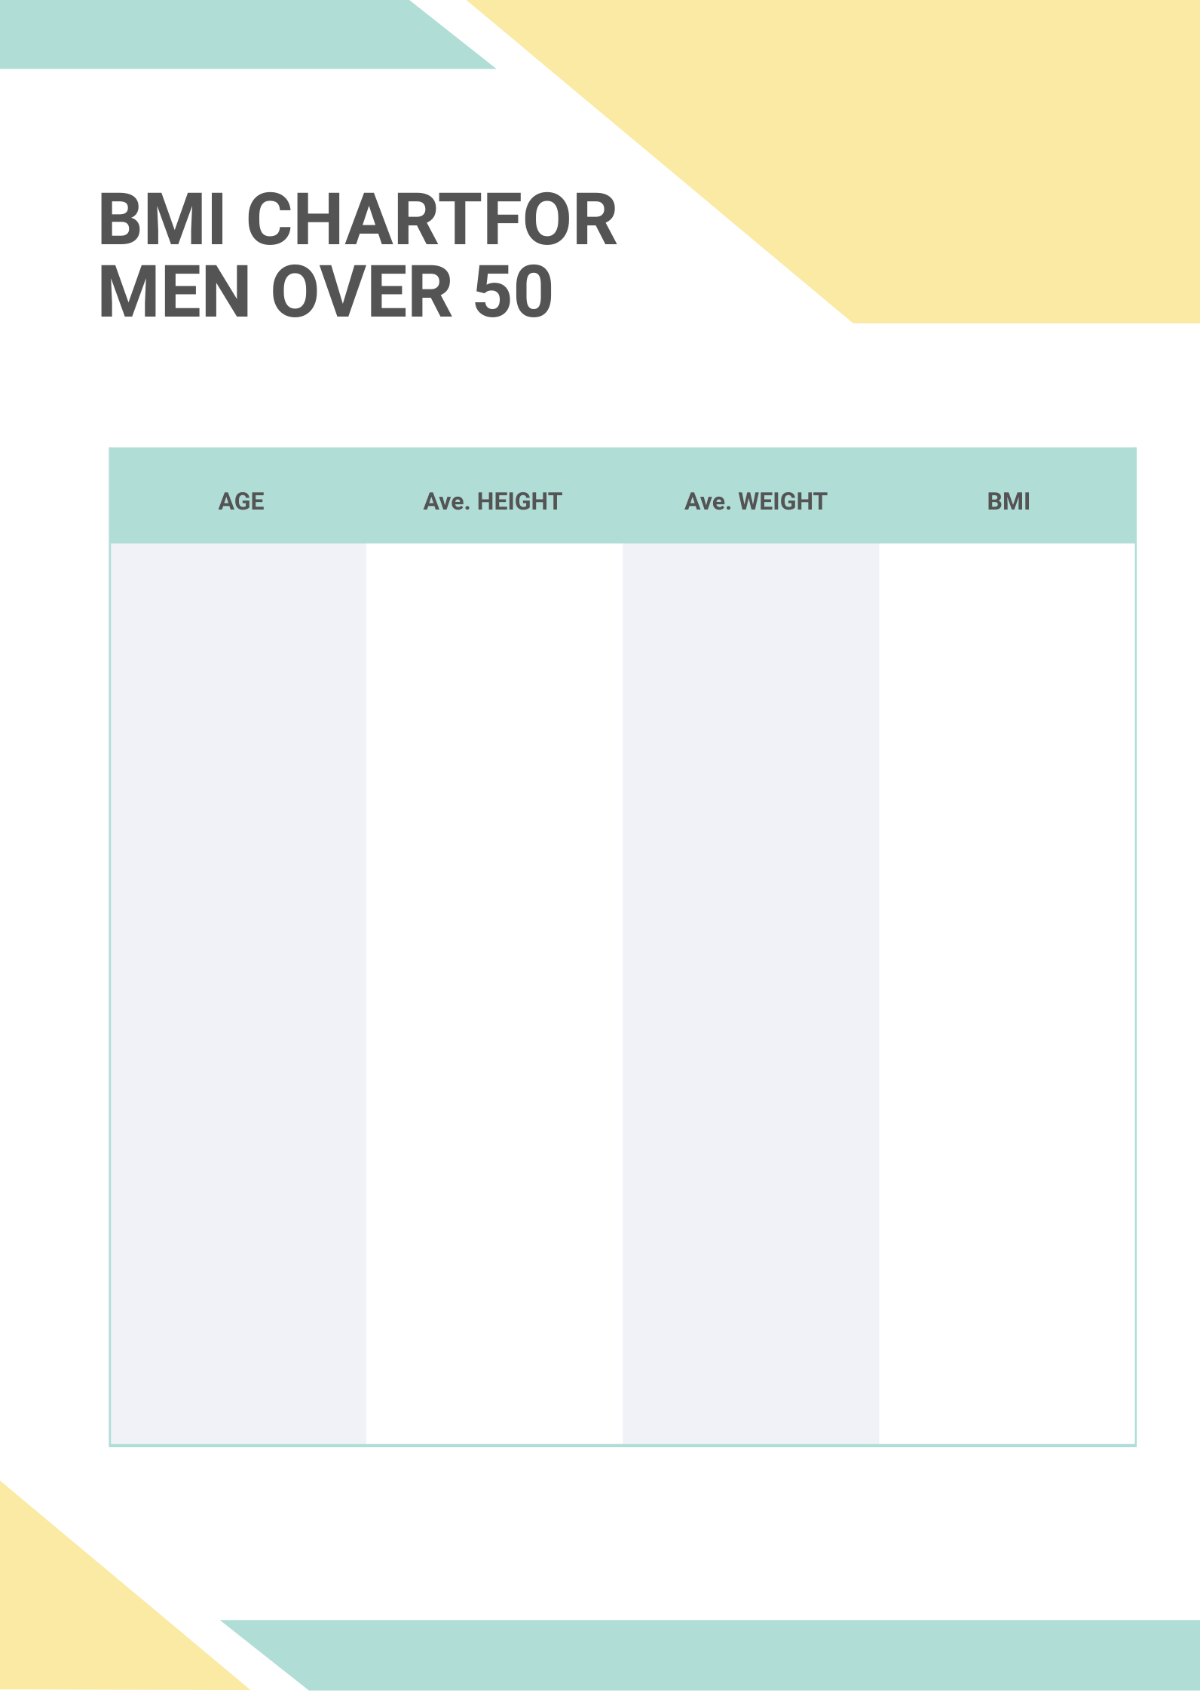 BMI Chart For Men Over 50 Template